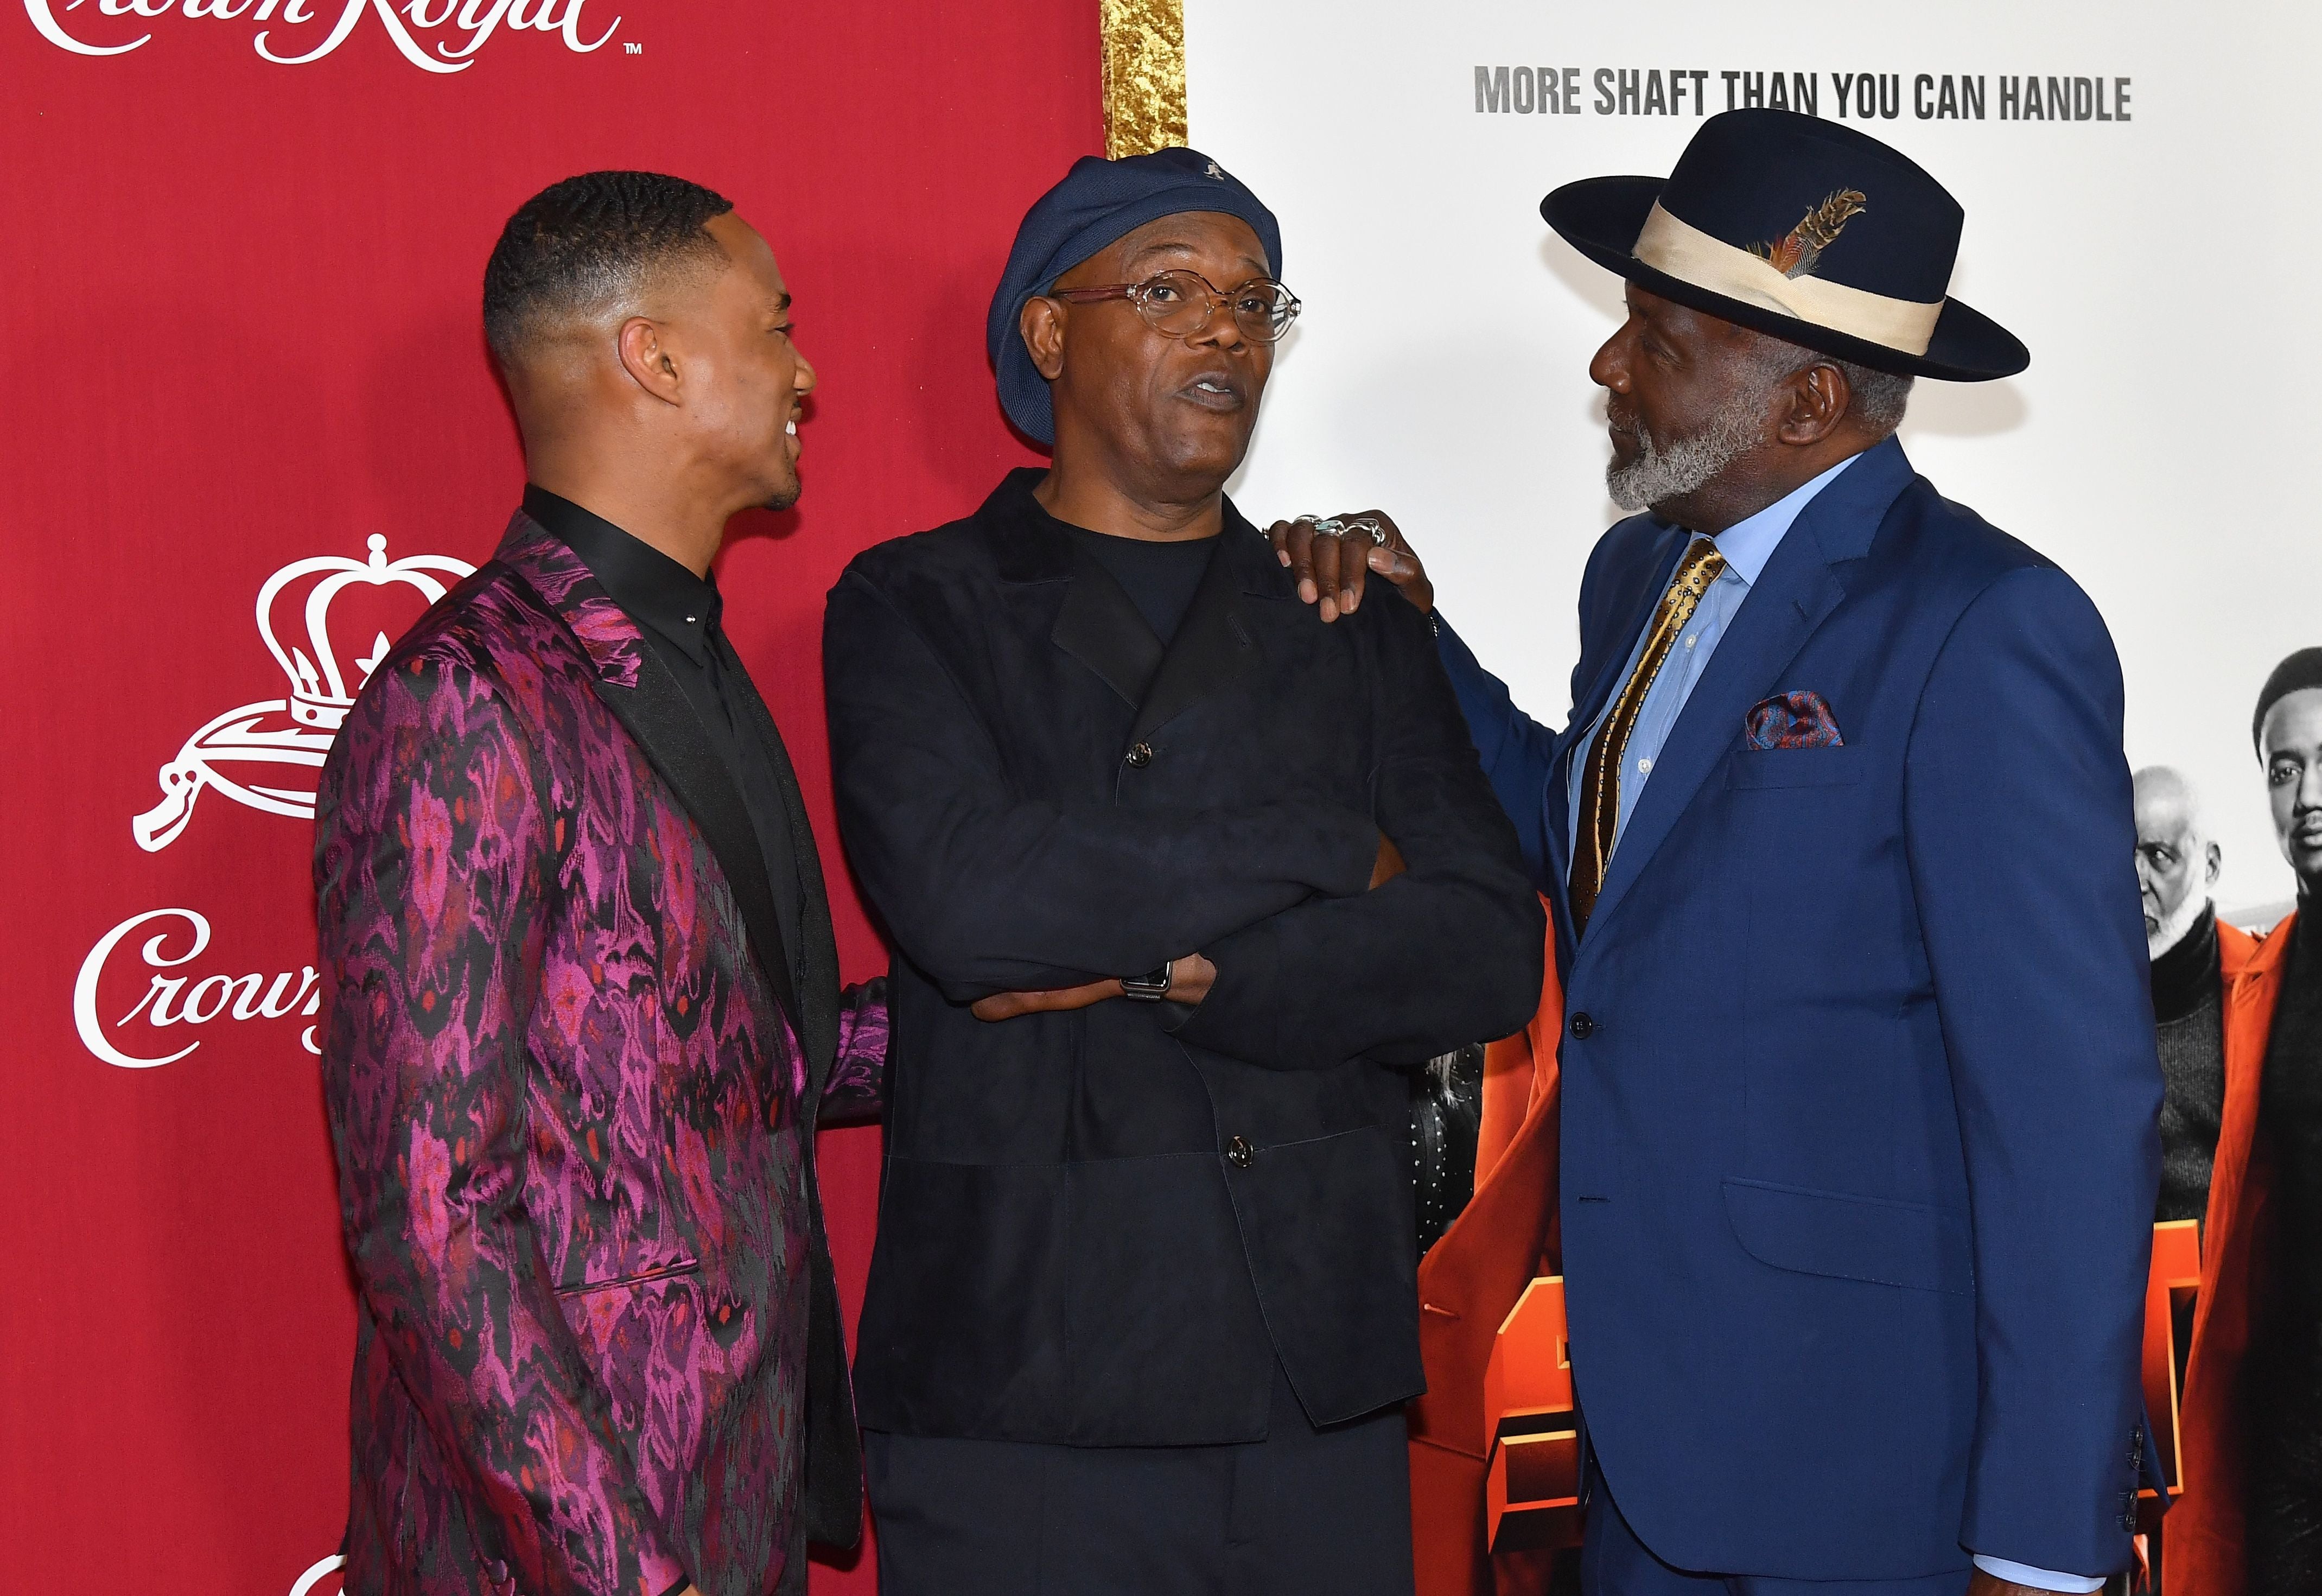 'Shaft' Star Jessie T. Usher Shares The Hilarious Story Of The First Time Samuel L. Jackson Cursed At Him